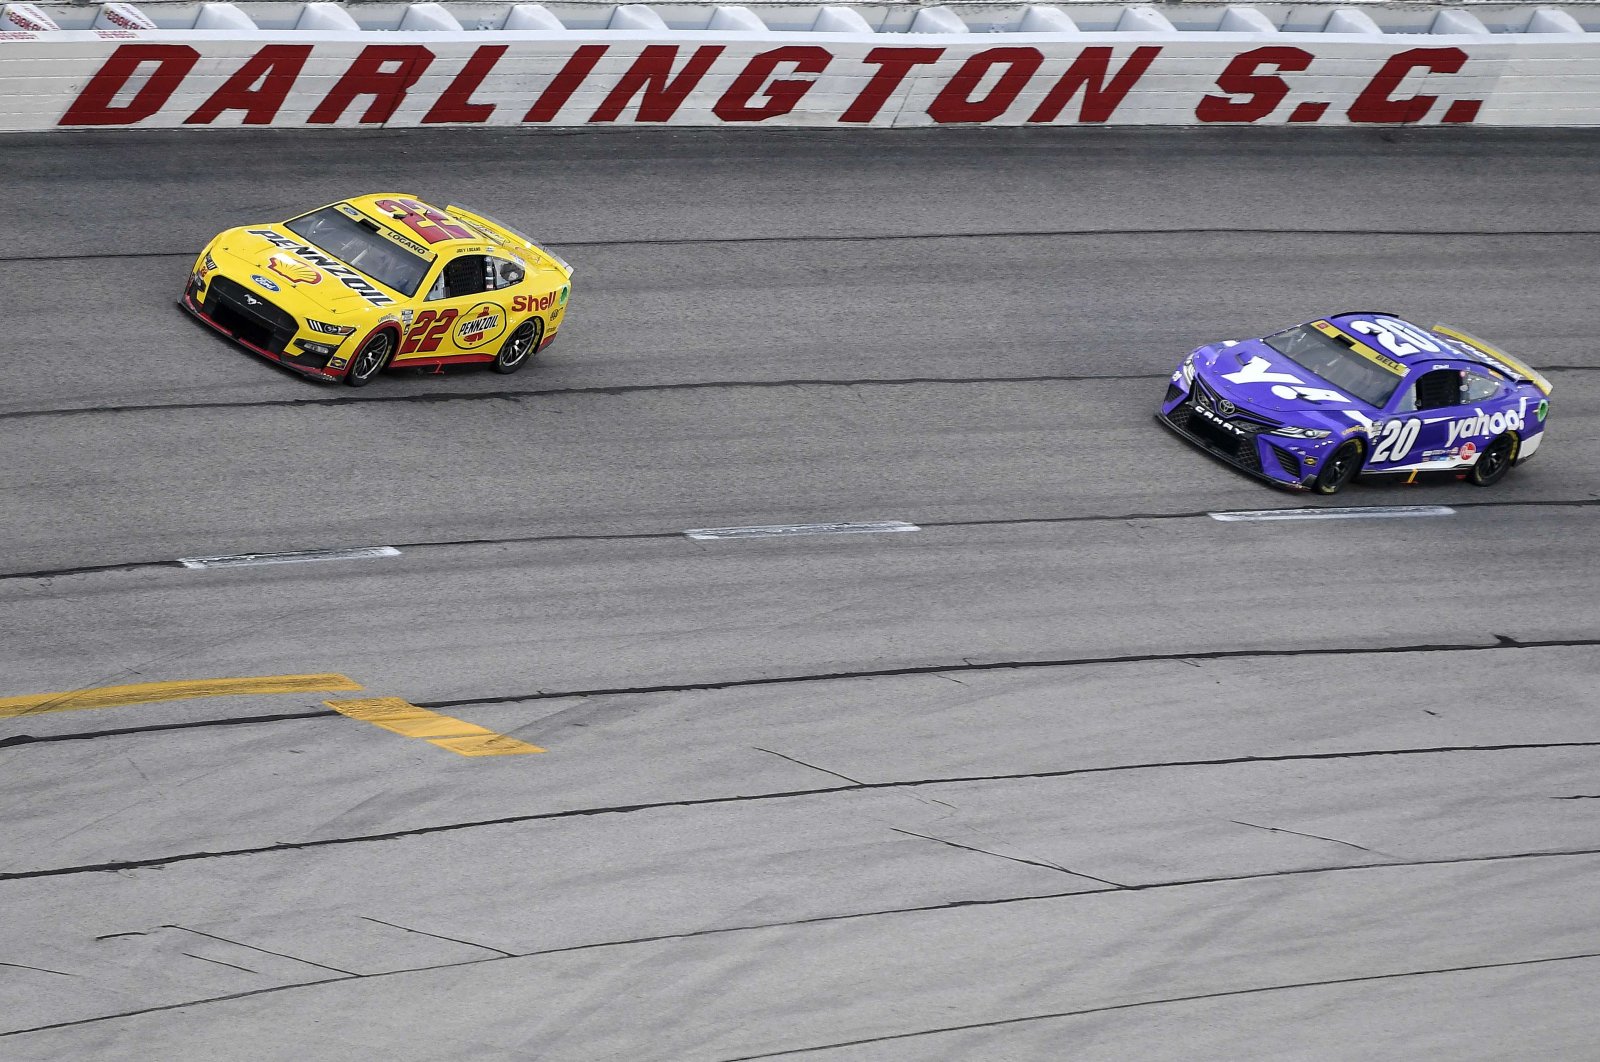 Joey Logano, driver of number 22 Shell Pennzoil Ford and Christopher Bell, driver of number 20 Yahoo! Toyota, race in Darlington, U.S., Sept. 4, 2022. (AFP PHOTO)